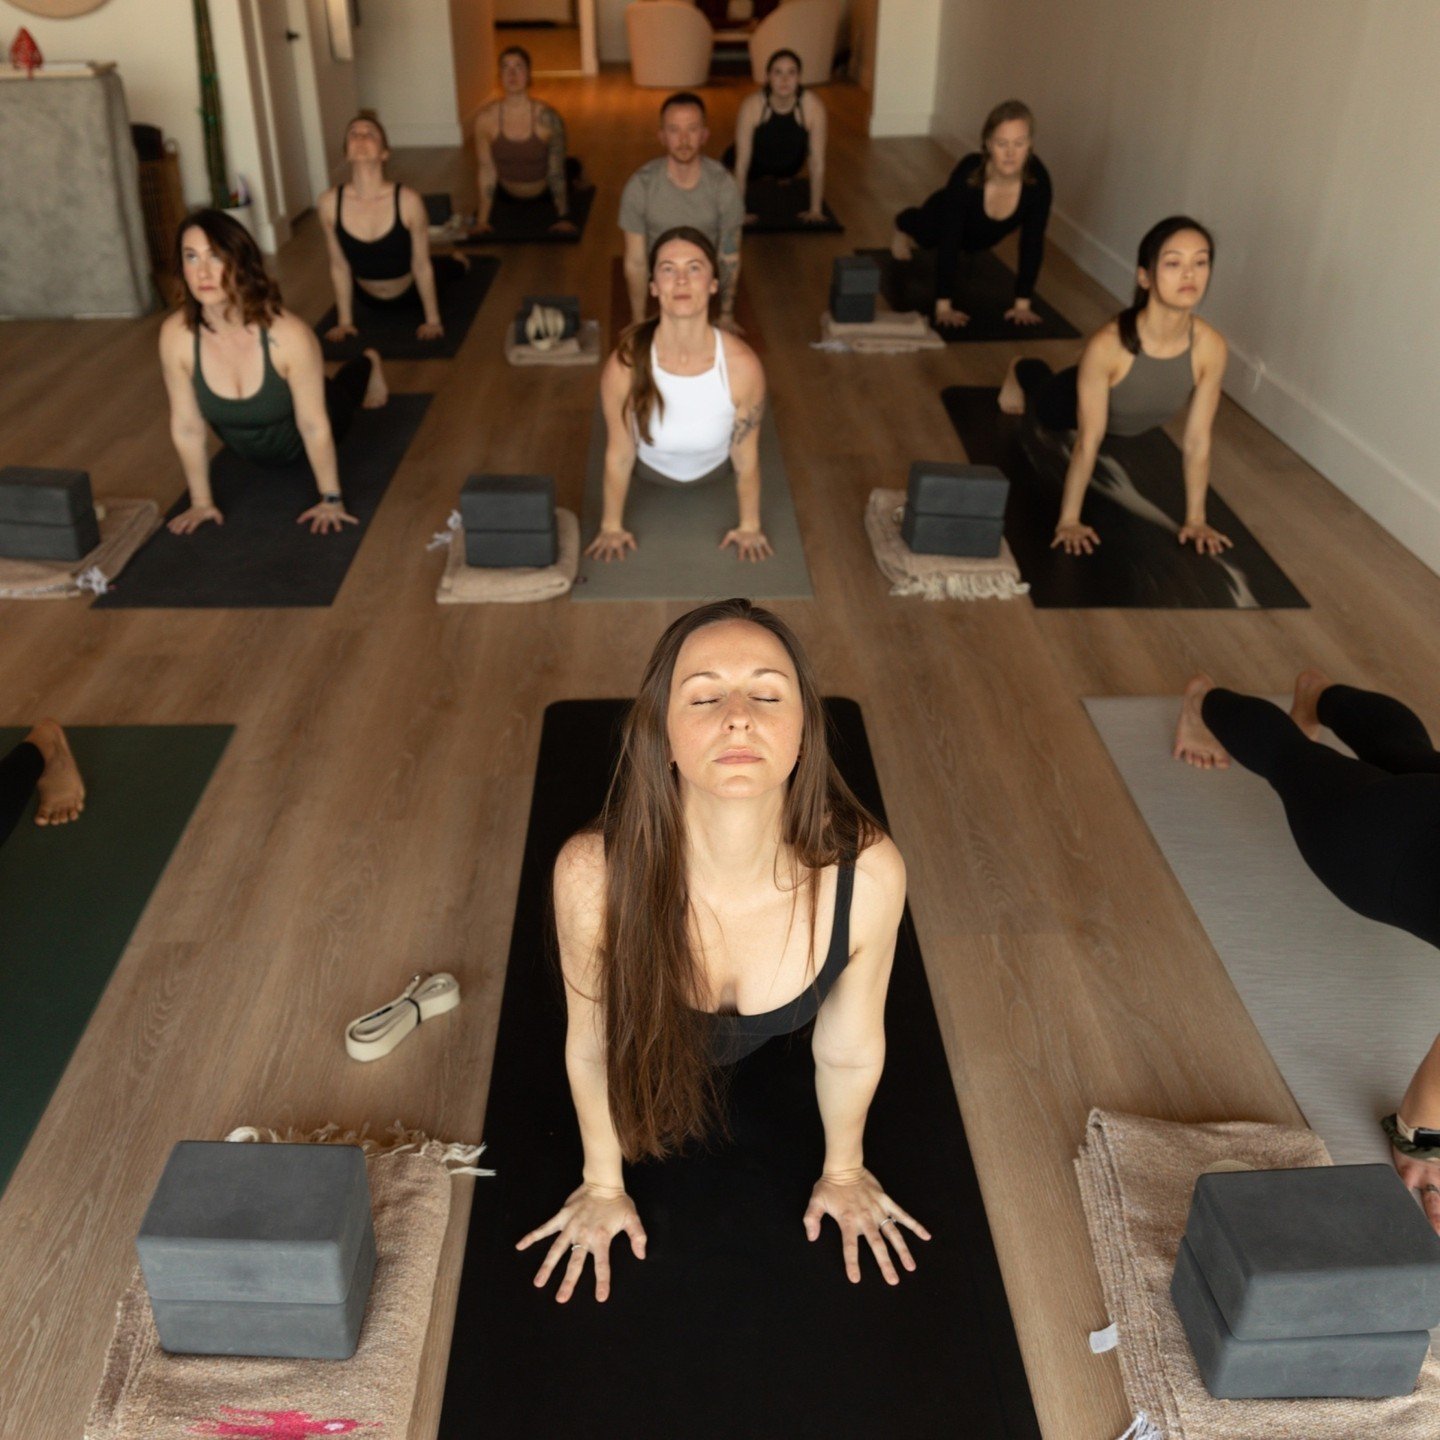 Let's all take a moment to appreciate our incredible ZW instructors who cultivate a welcoming and supportive community. We wouldn't be where we are today without their guidance and dedication to the practice of yoga. 💜

Our instructors bring unique 